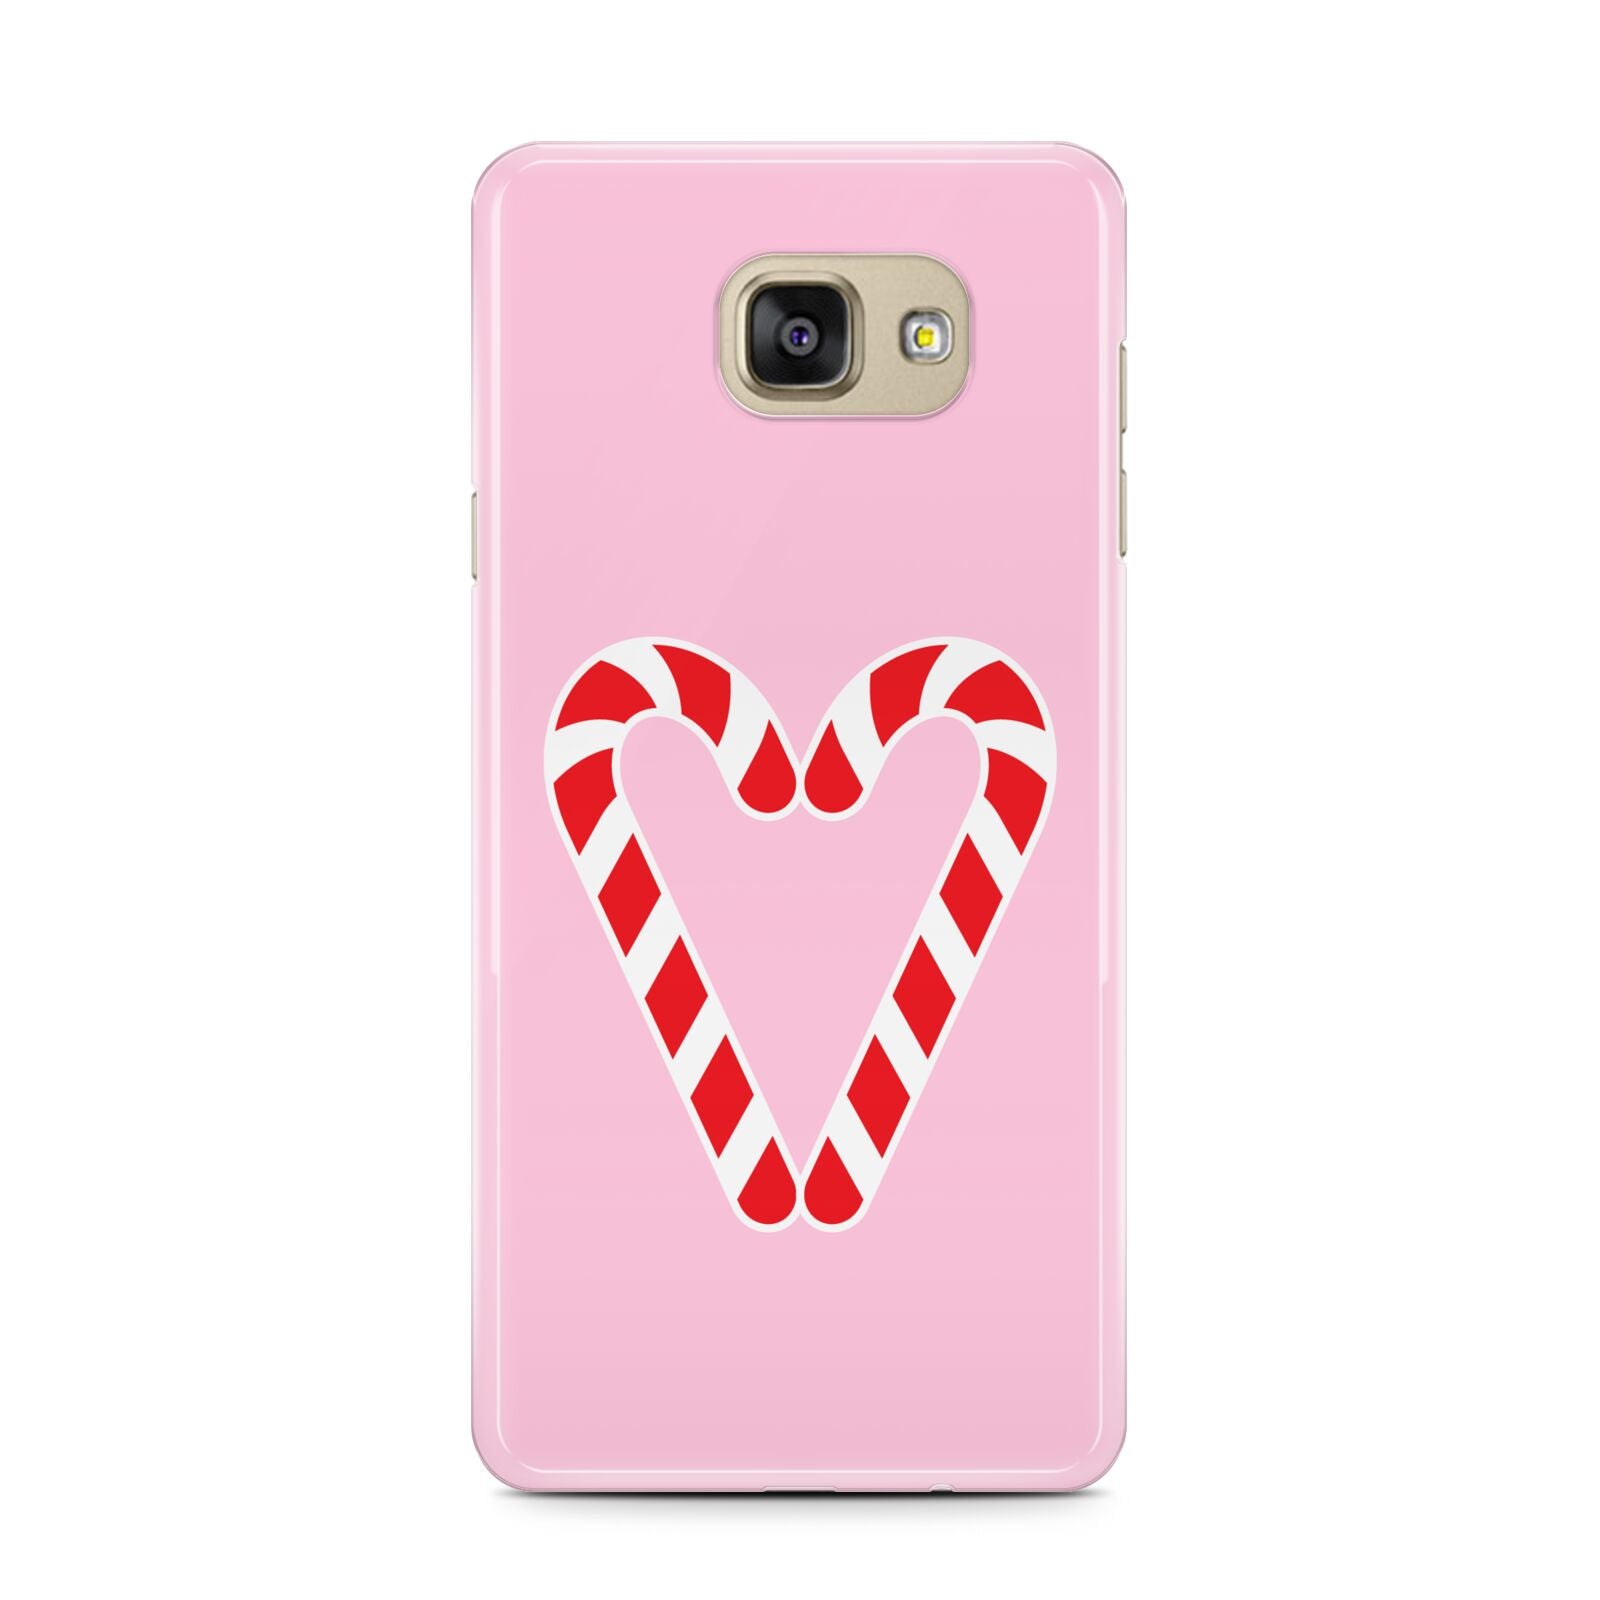 Candy Cane Heart Samsung Galaxy A7 2016 Case on gold phone